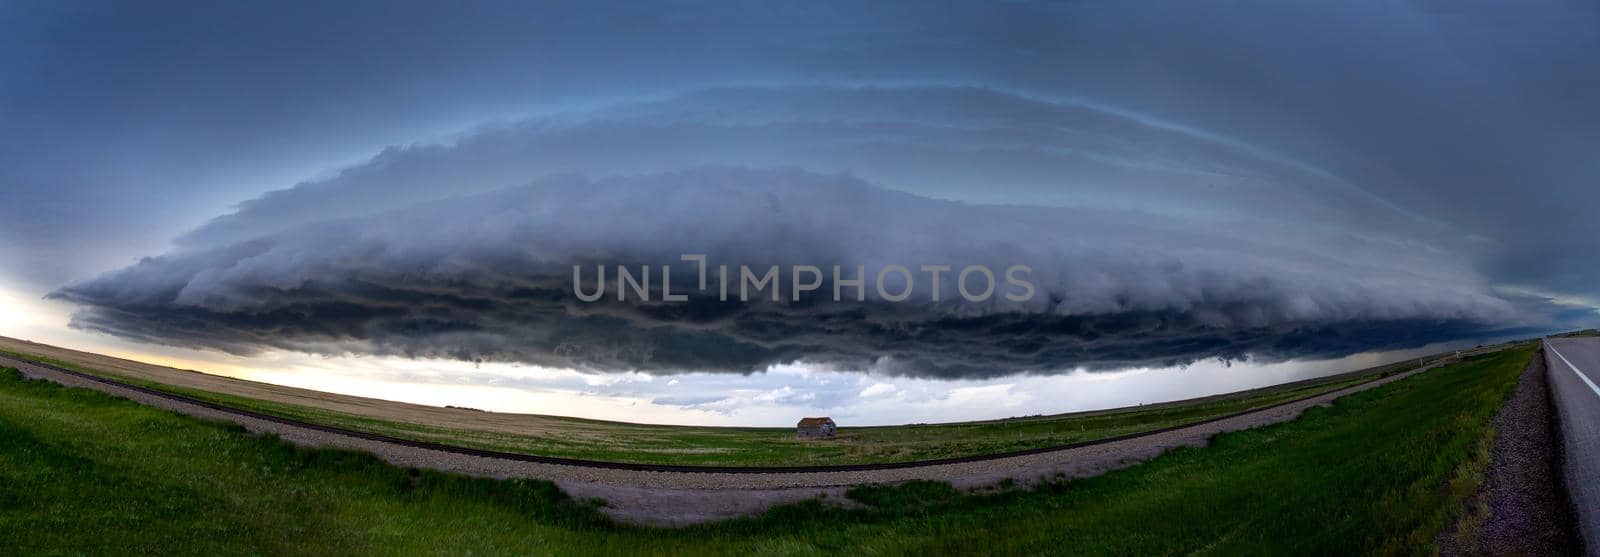 Summer Storm Canada by pictureguy